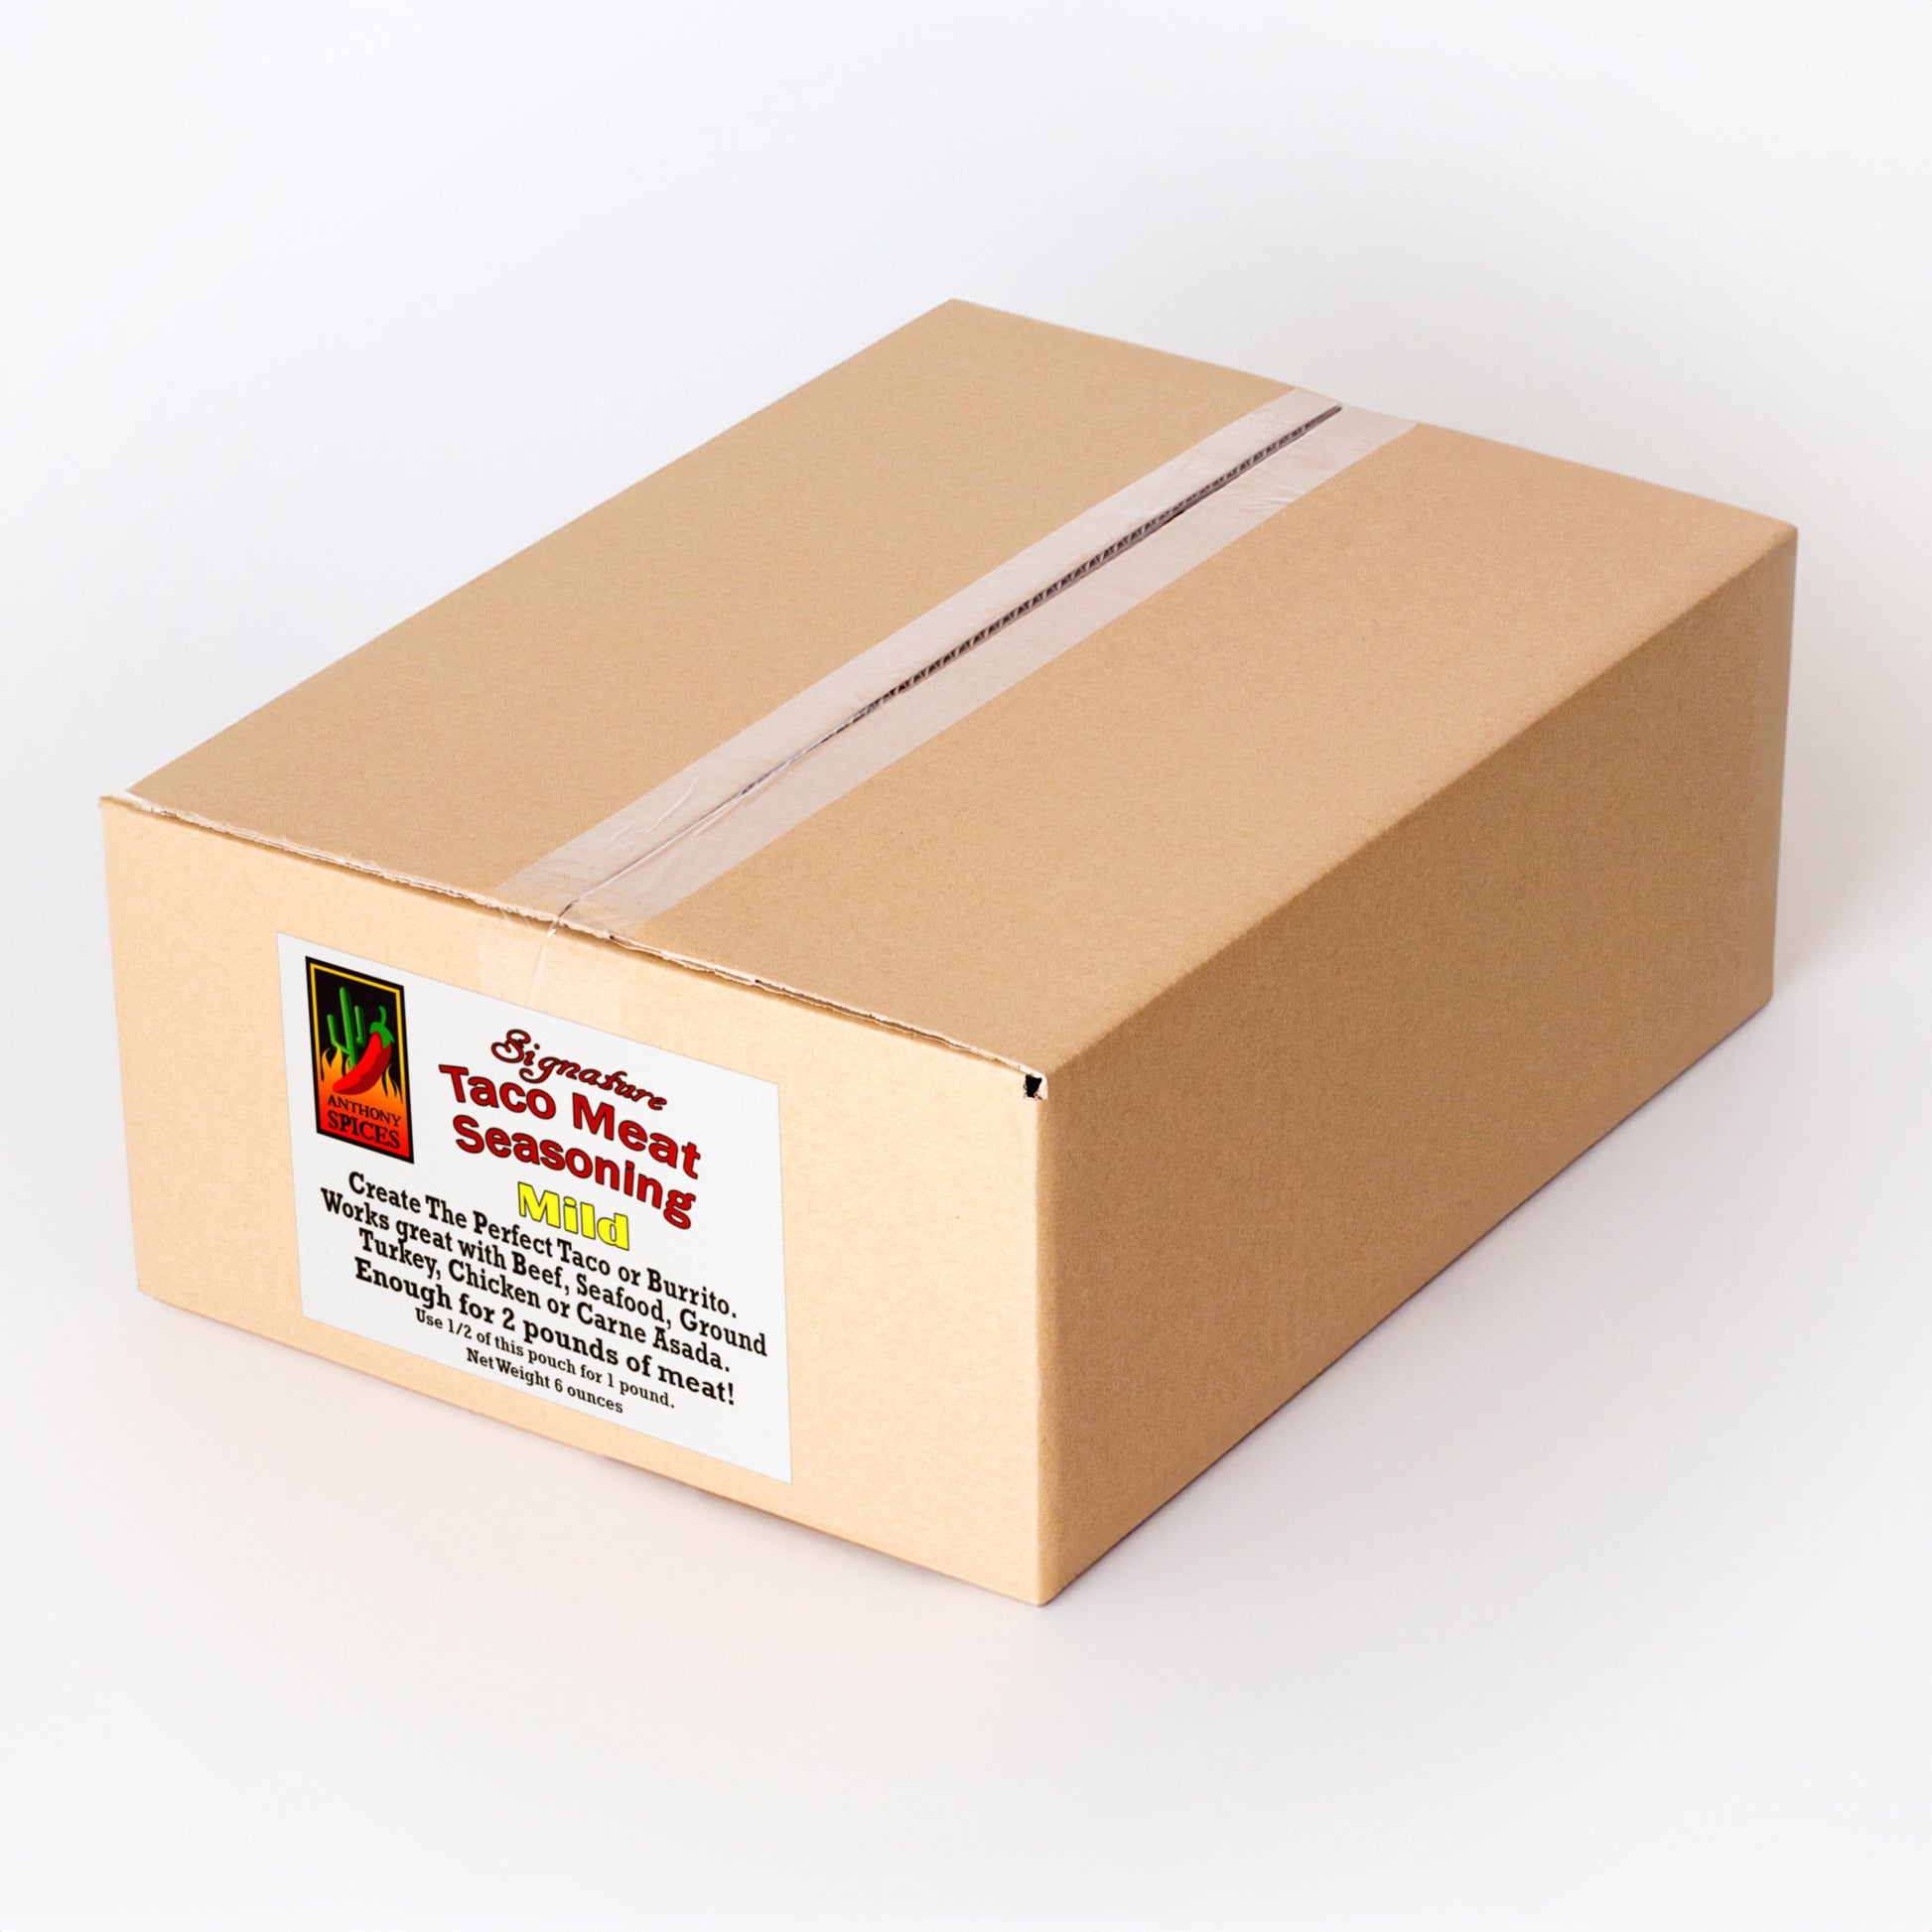 Case of 12 (6oz Bags) of Mild Taco Seasoning - Closed shipping box with label